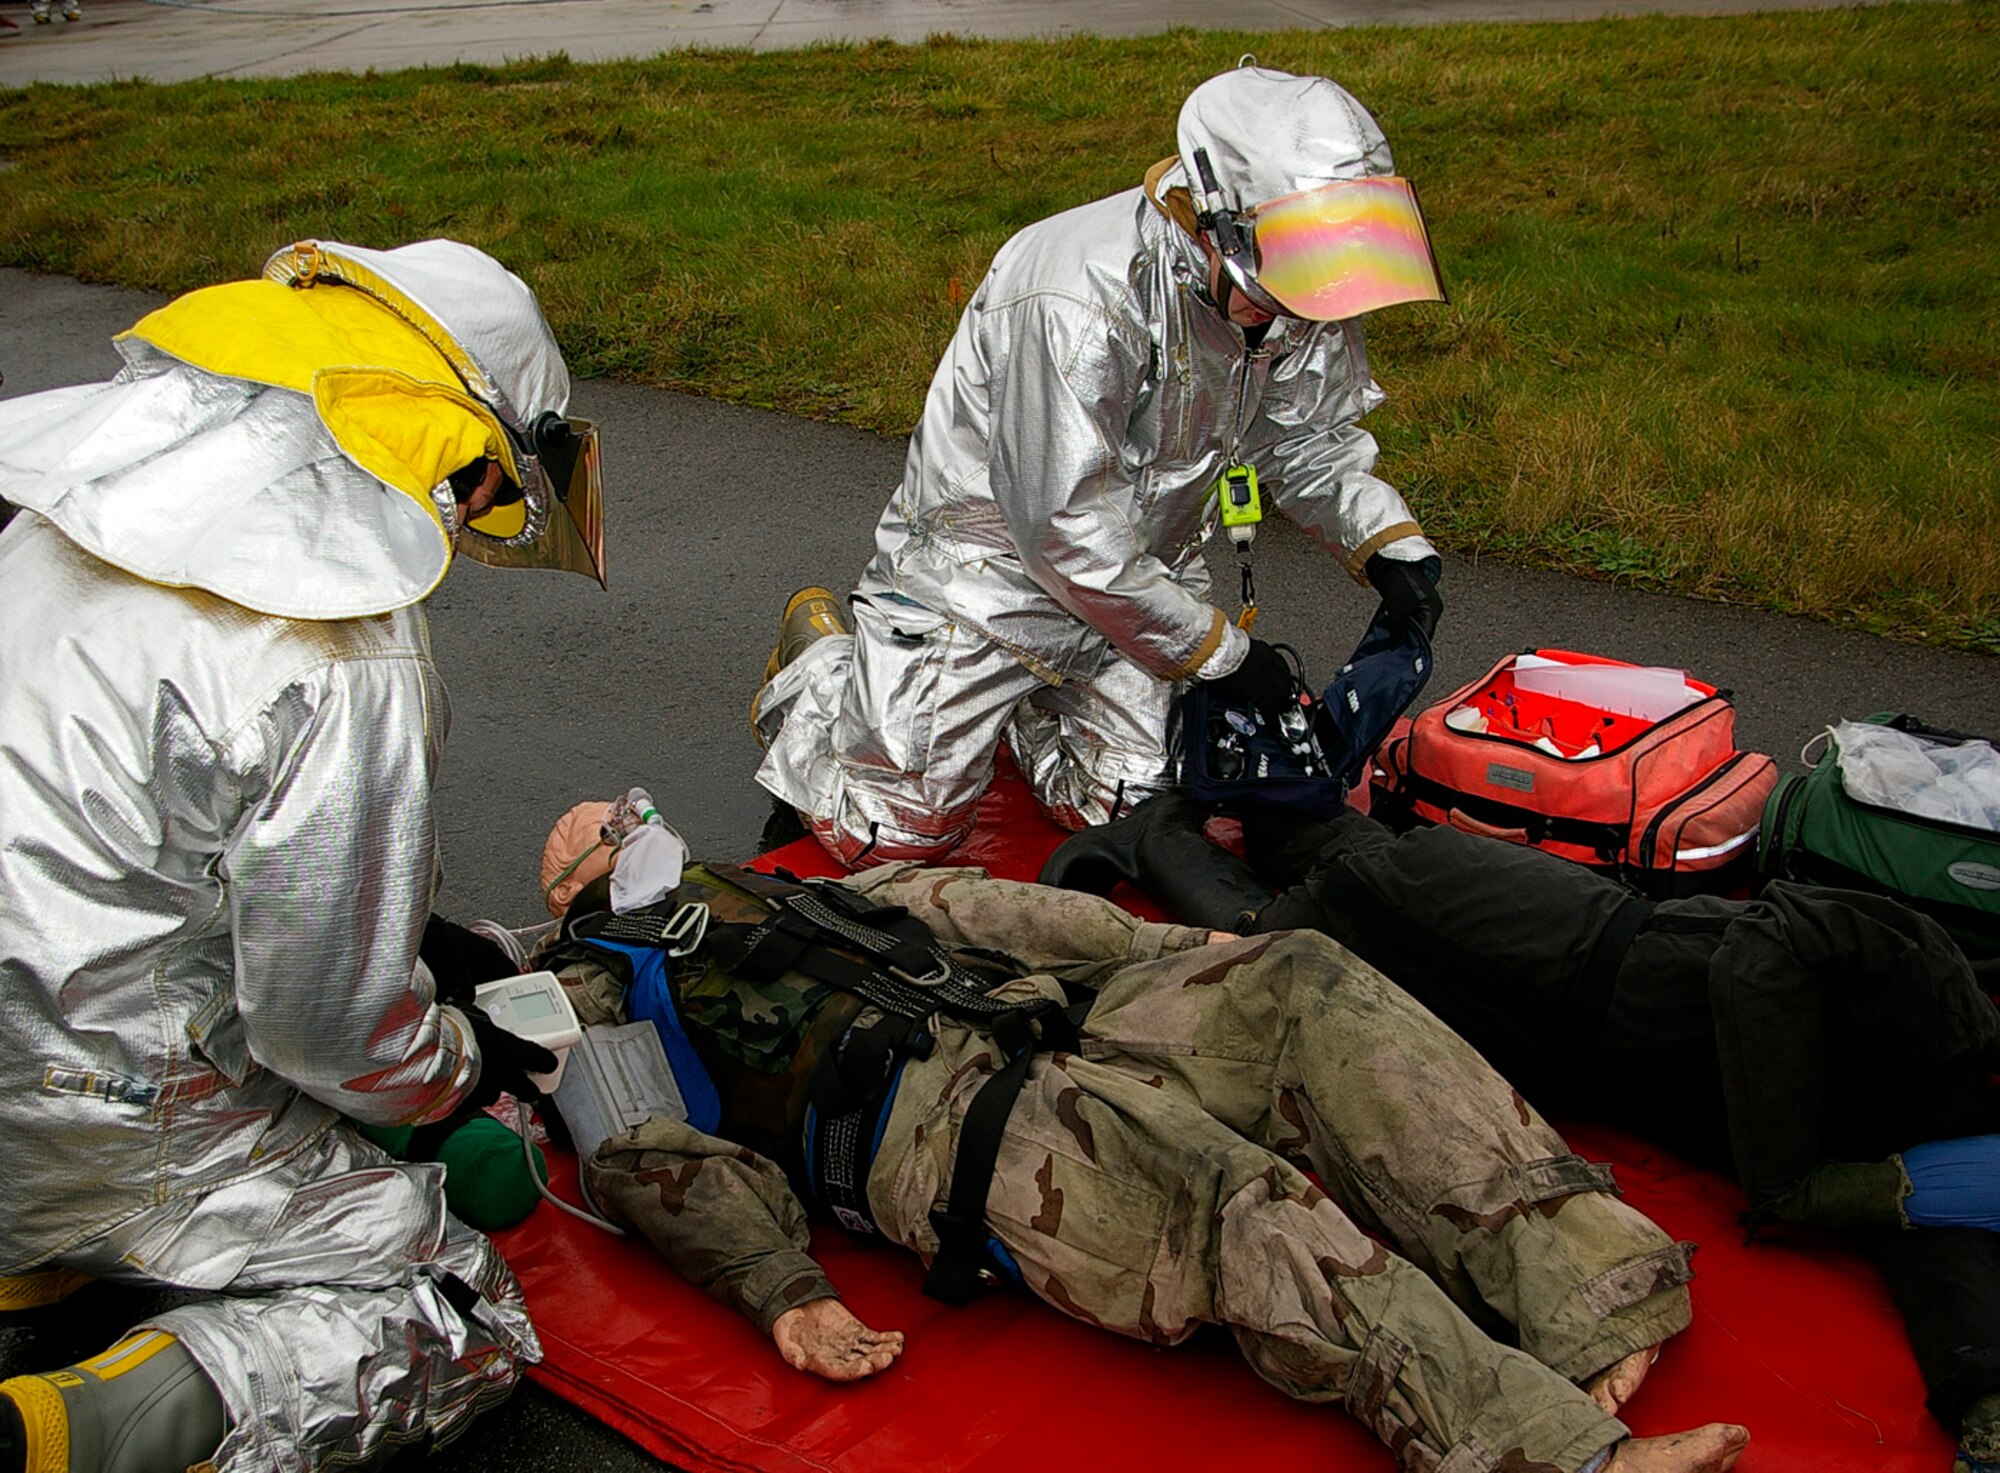 Airman 1st Class Scott May, left and Firefighter Simon Evans, both 100th Civil Engineer Squadron fire Department, simulate emergency care of an "injured person" during a training exercise on the southside of base. The exercise consisted of a simulated aircraft engine fire with two people unaccounted for. (U.S. Air Force photo by Karen Abeyasekere)